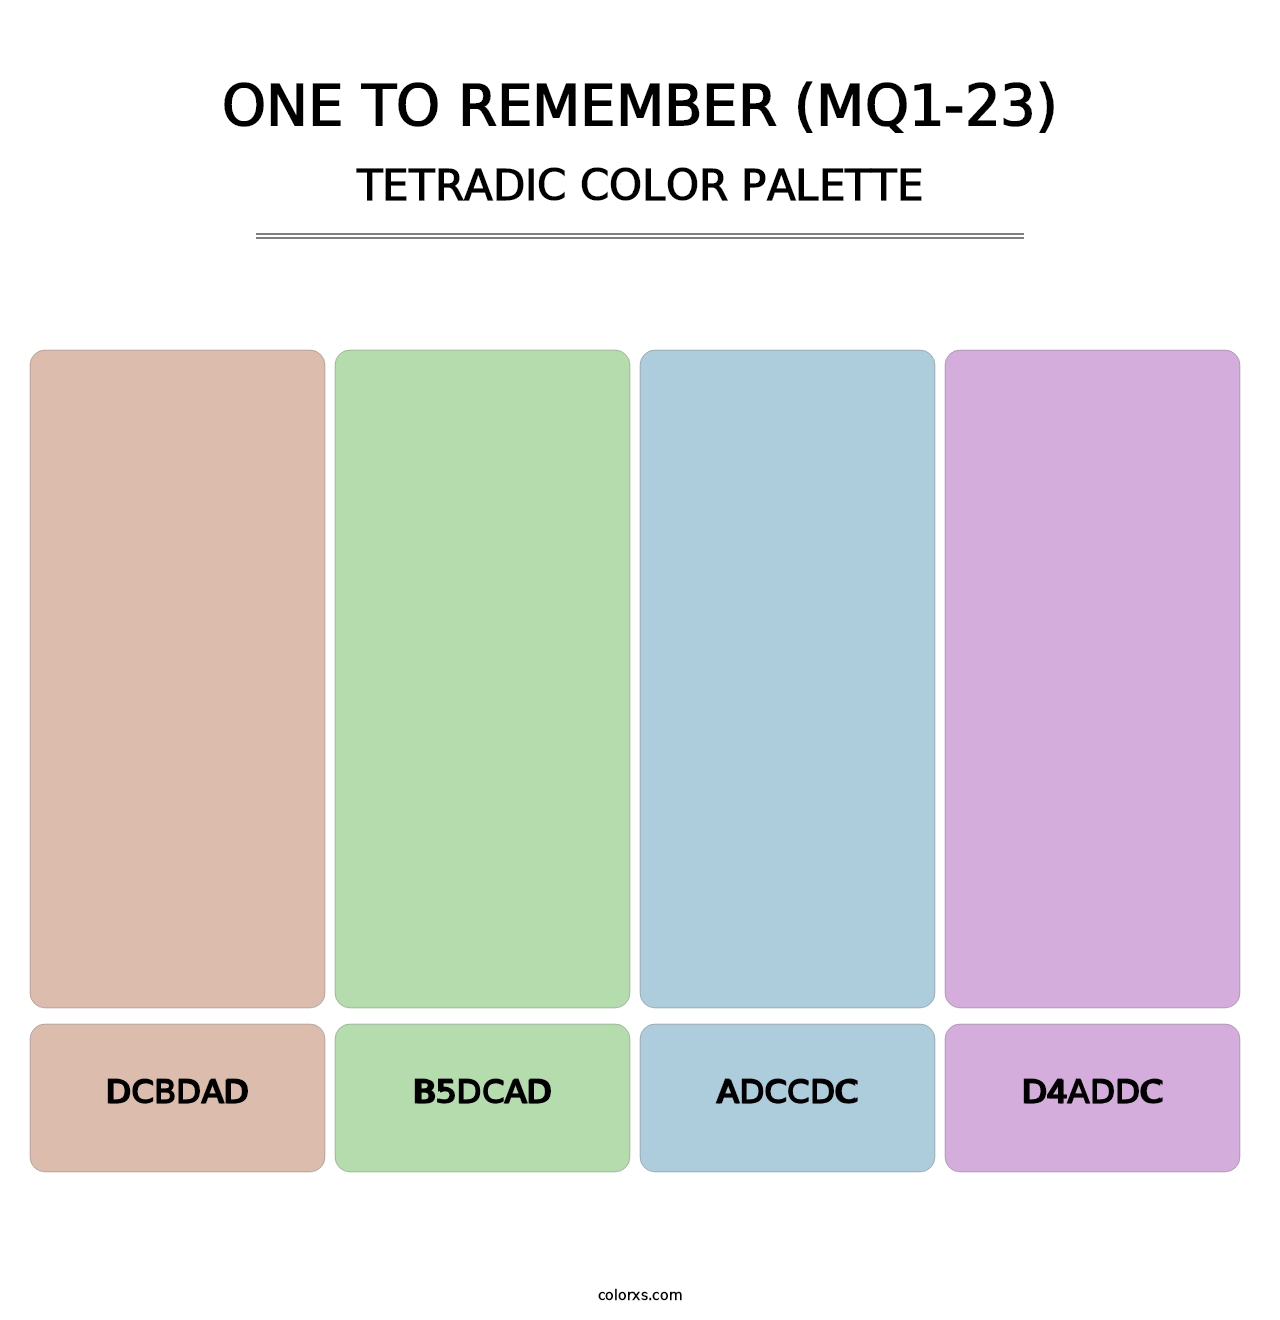 One To Remember (MQ1-23) - Tetradic Color Palette